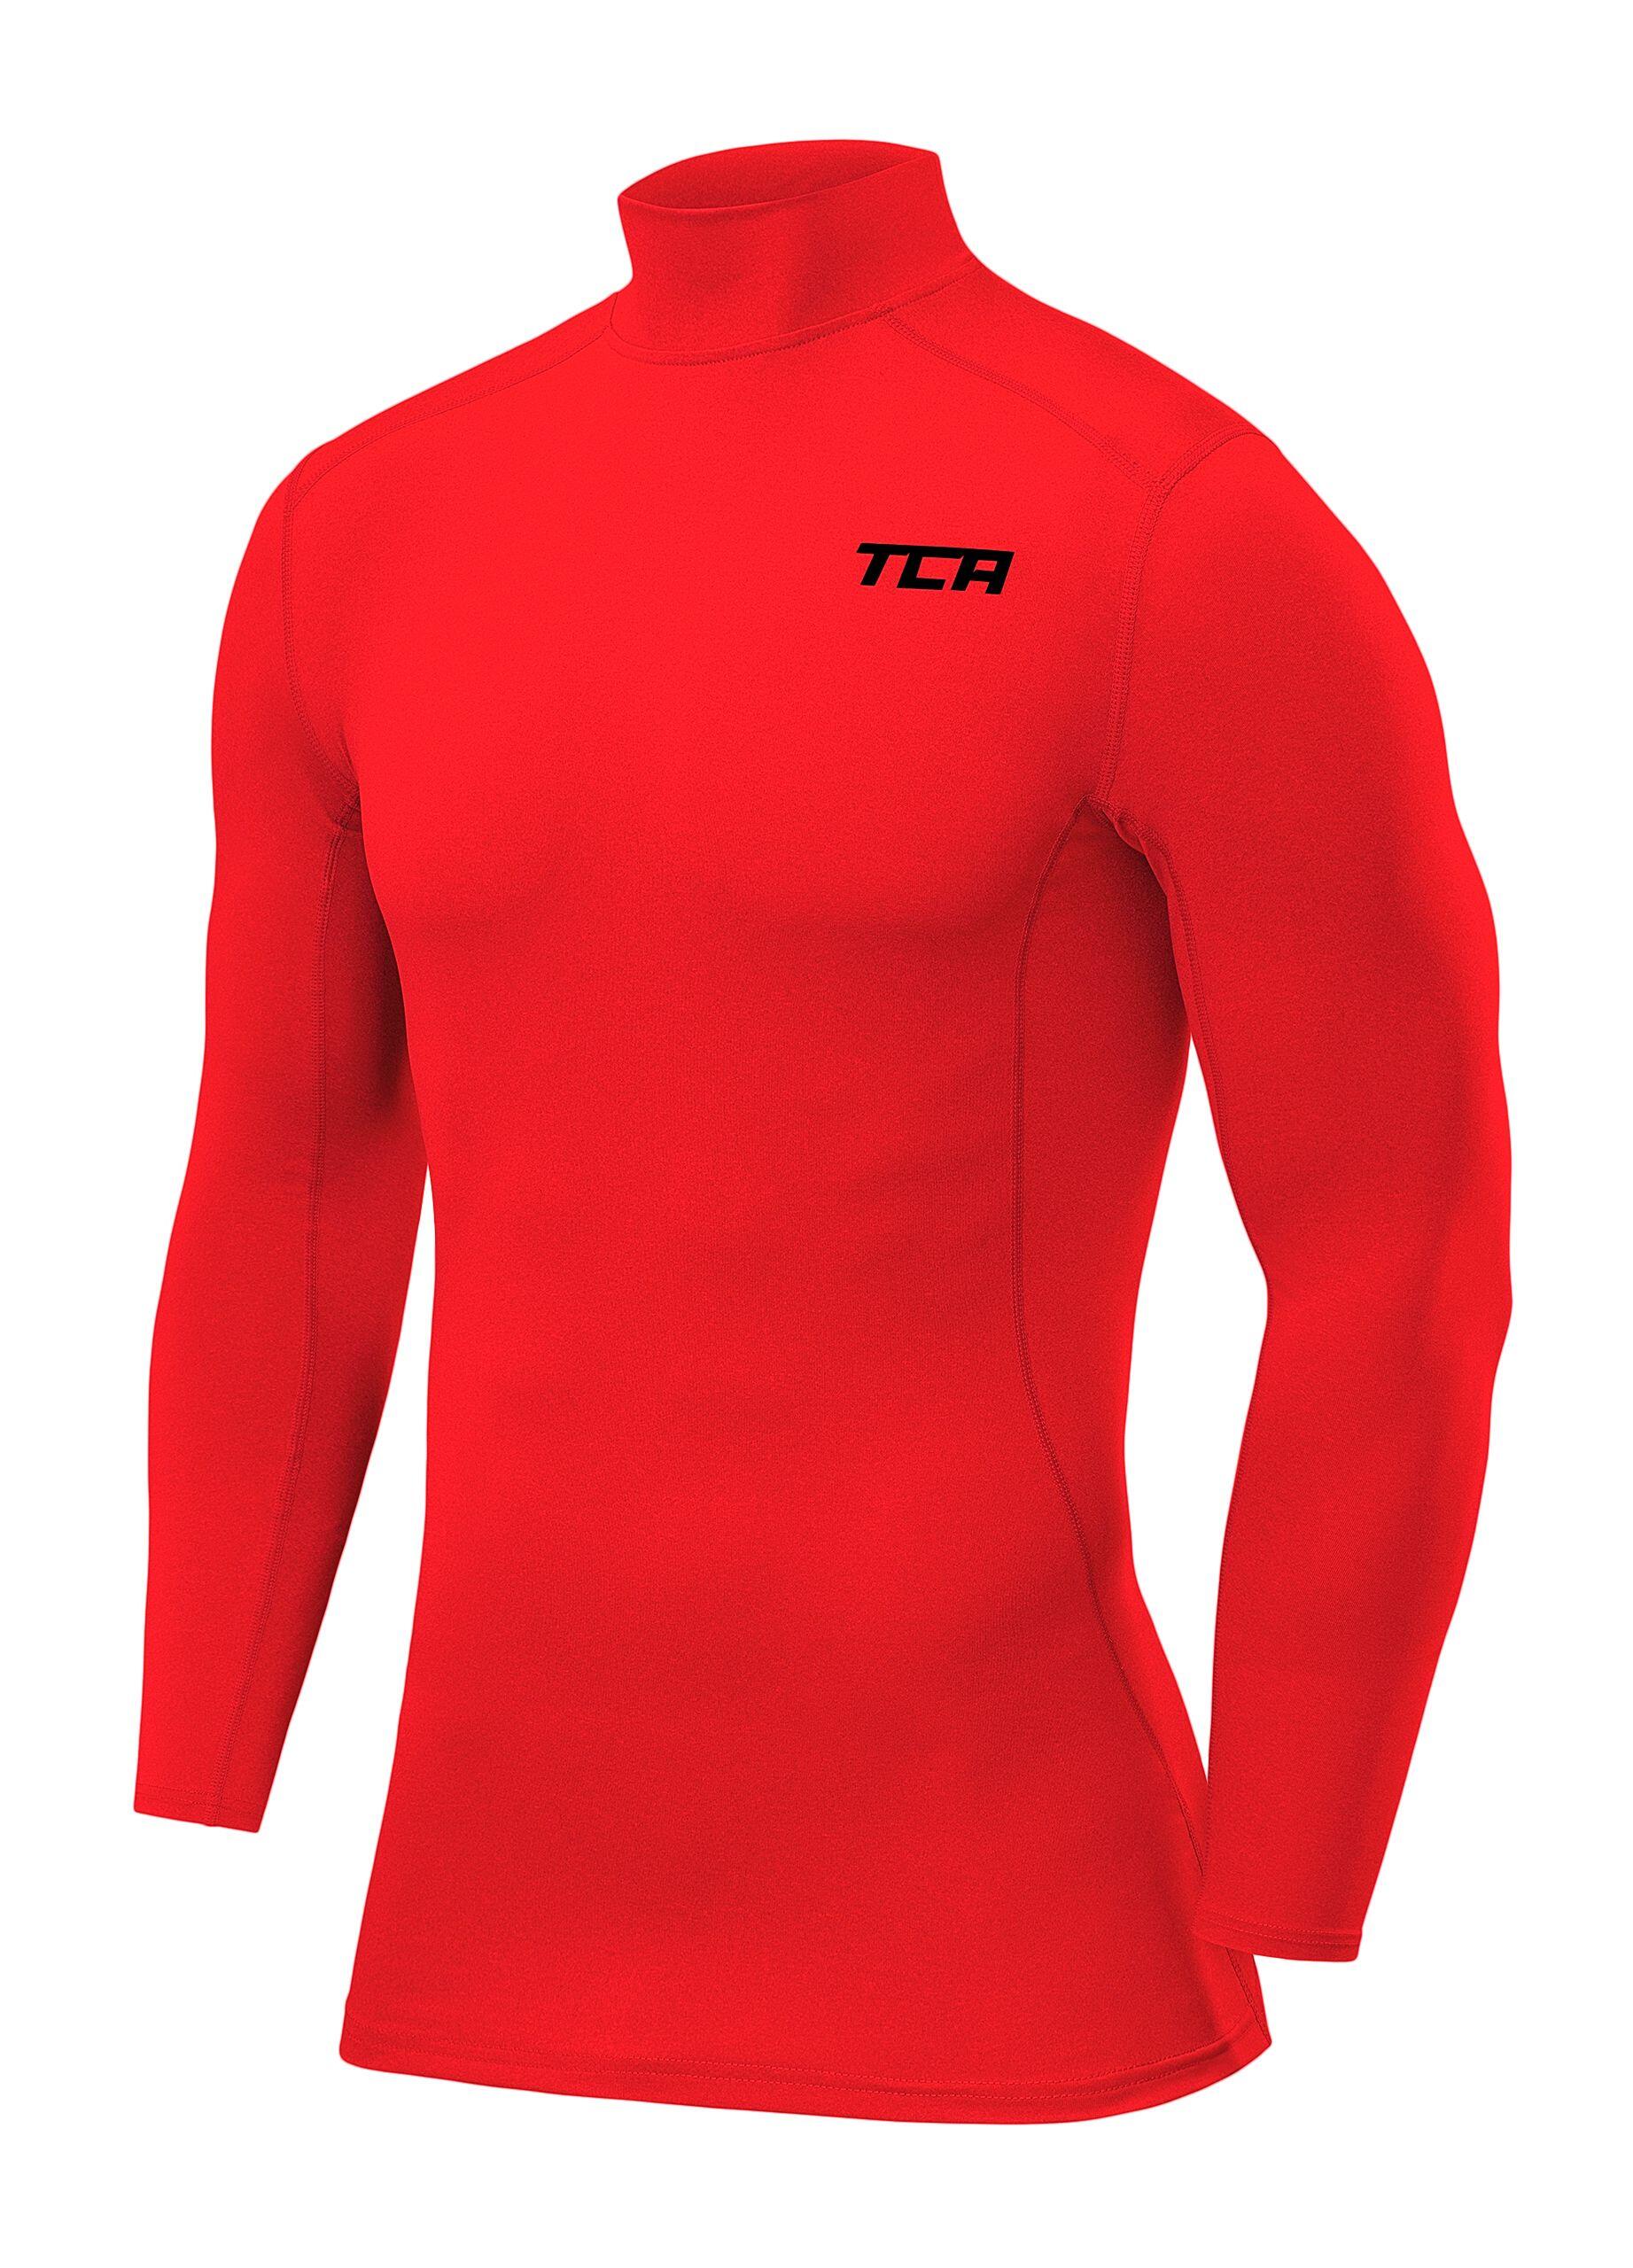 Boys' Performance Base Layer Compression Top - Mock - High Risk Red 1/5